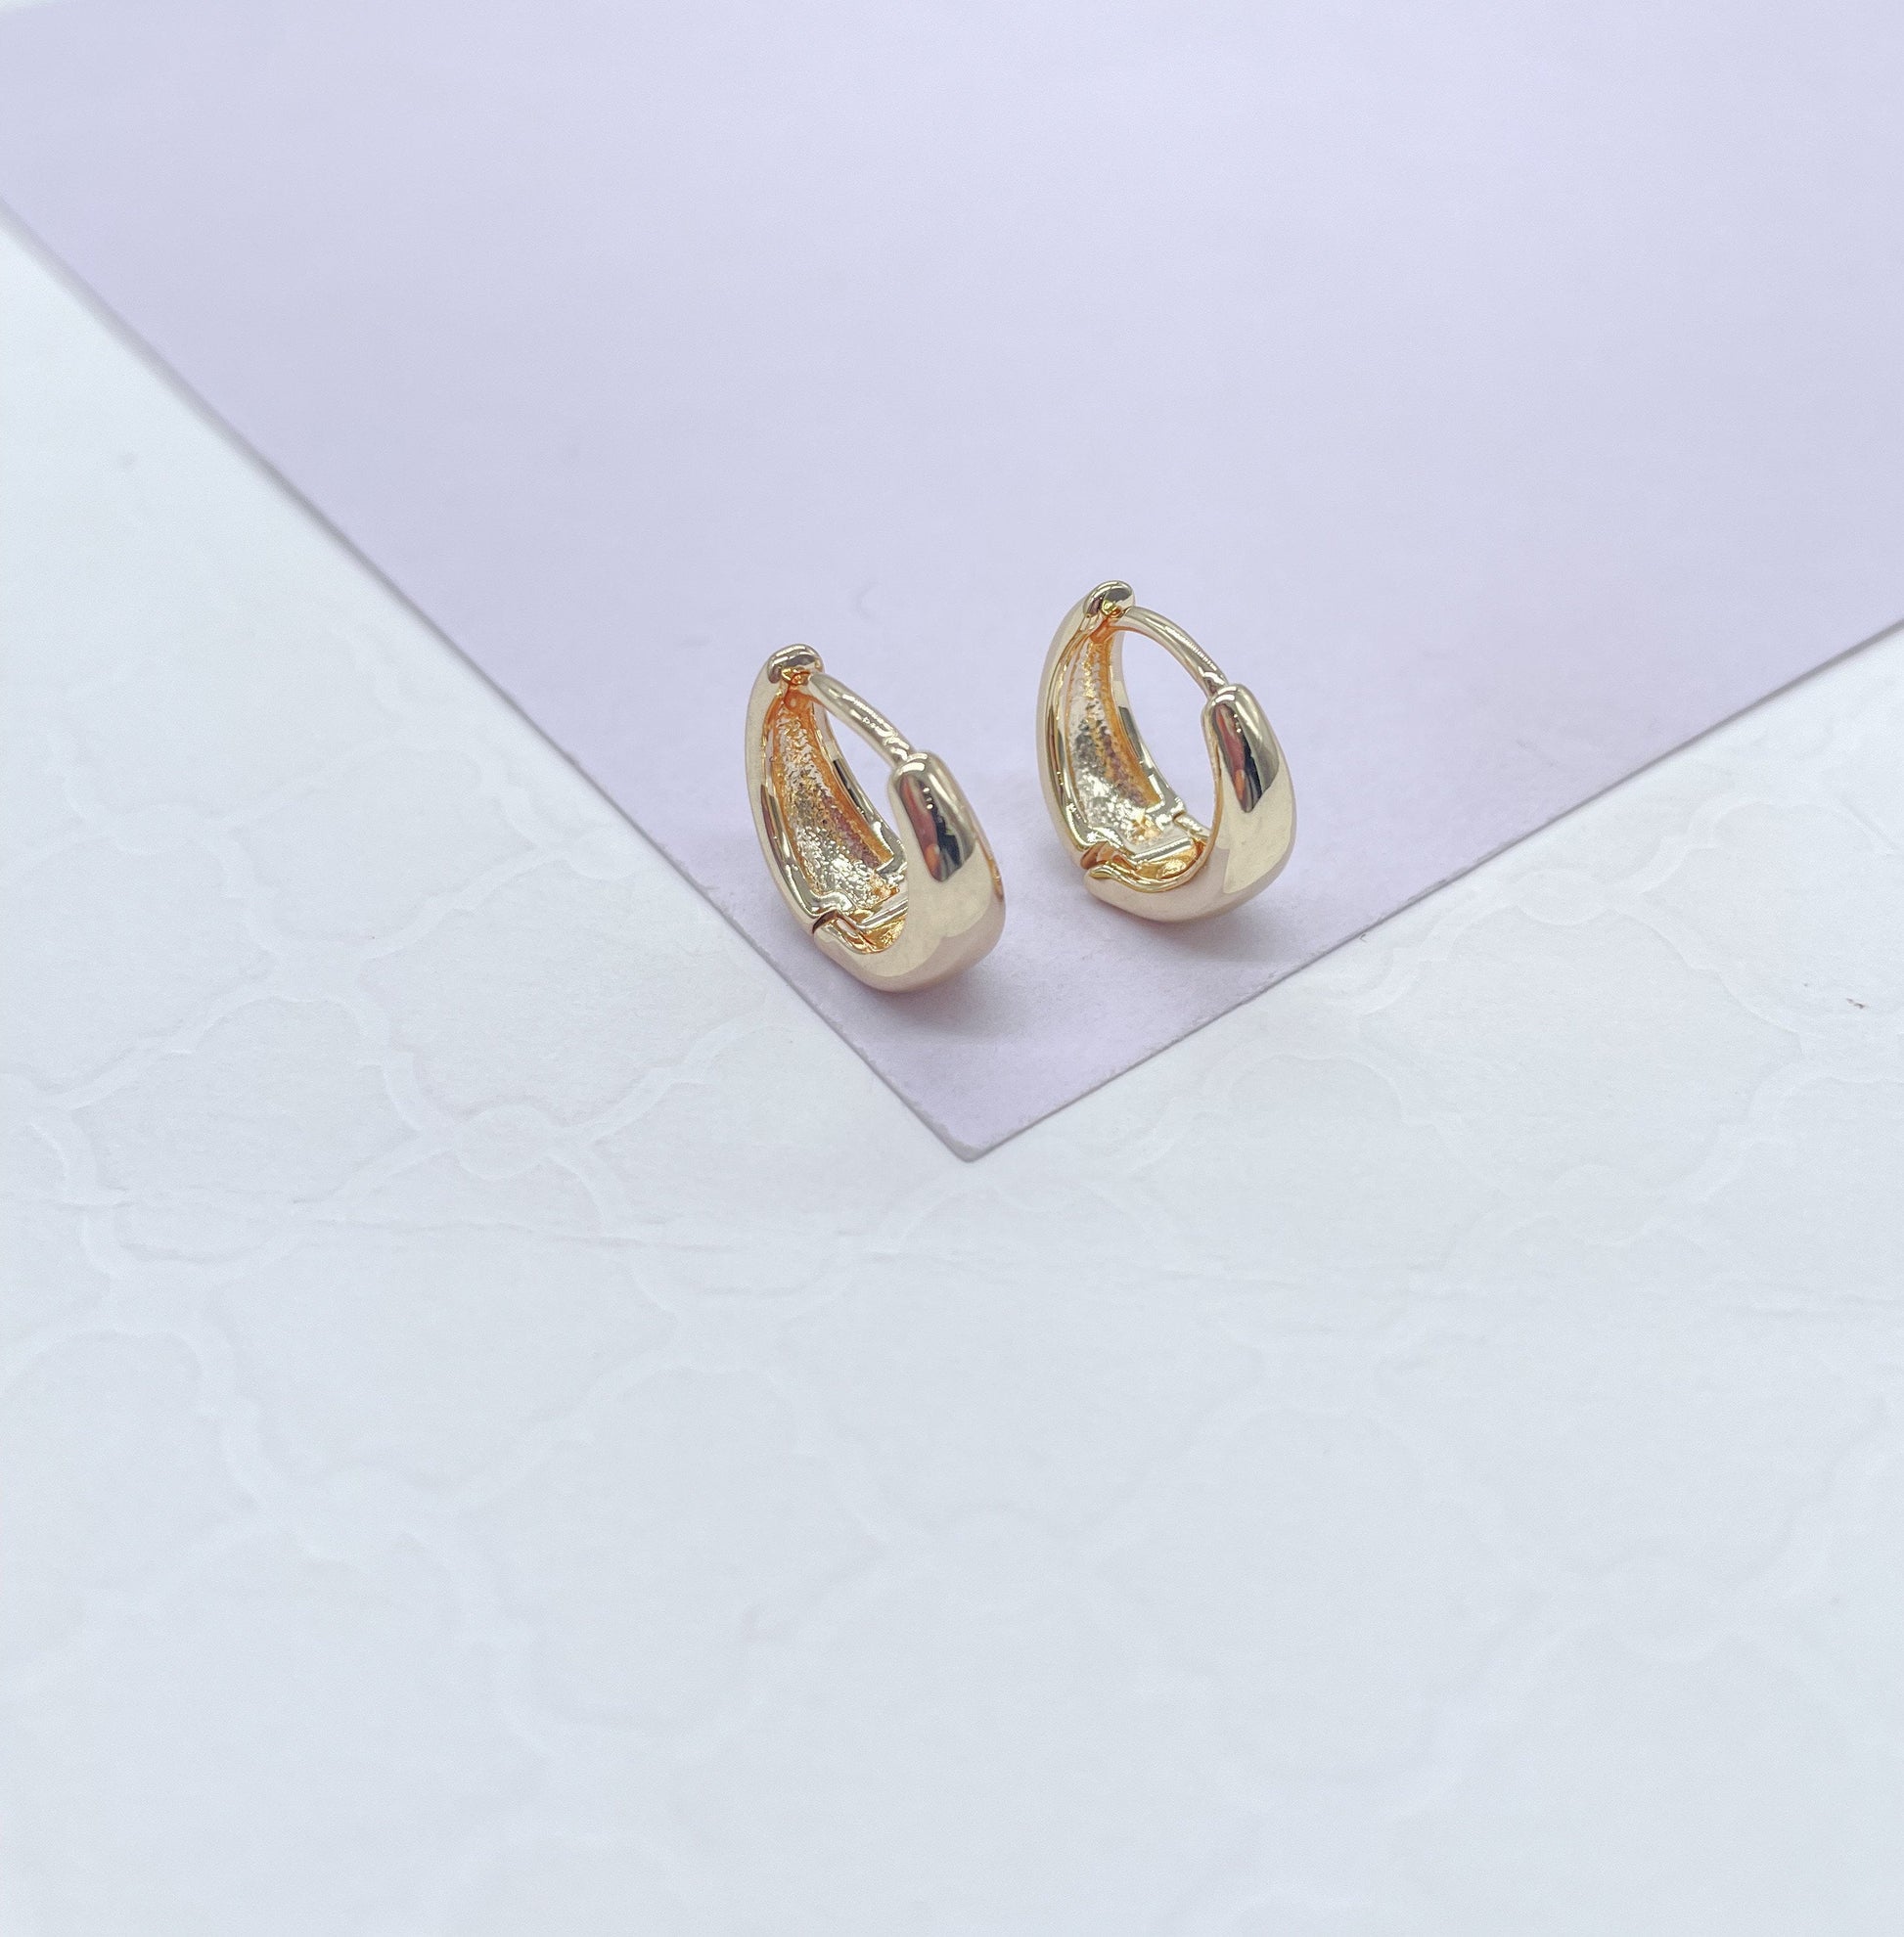 18k Gold Filled 6mm Small Smooth Tear Drop Shaped Edged Plain Hoop Earrings Wholesale Jewelry Supplies, Available in Two Sizes